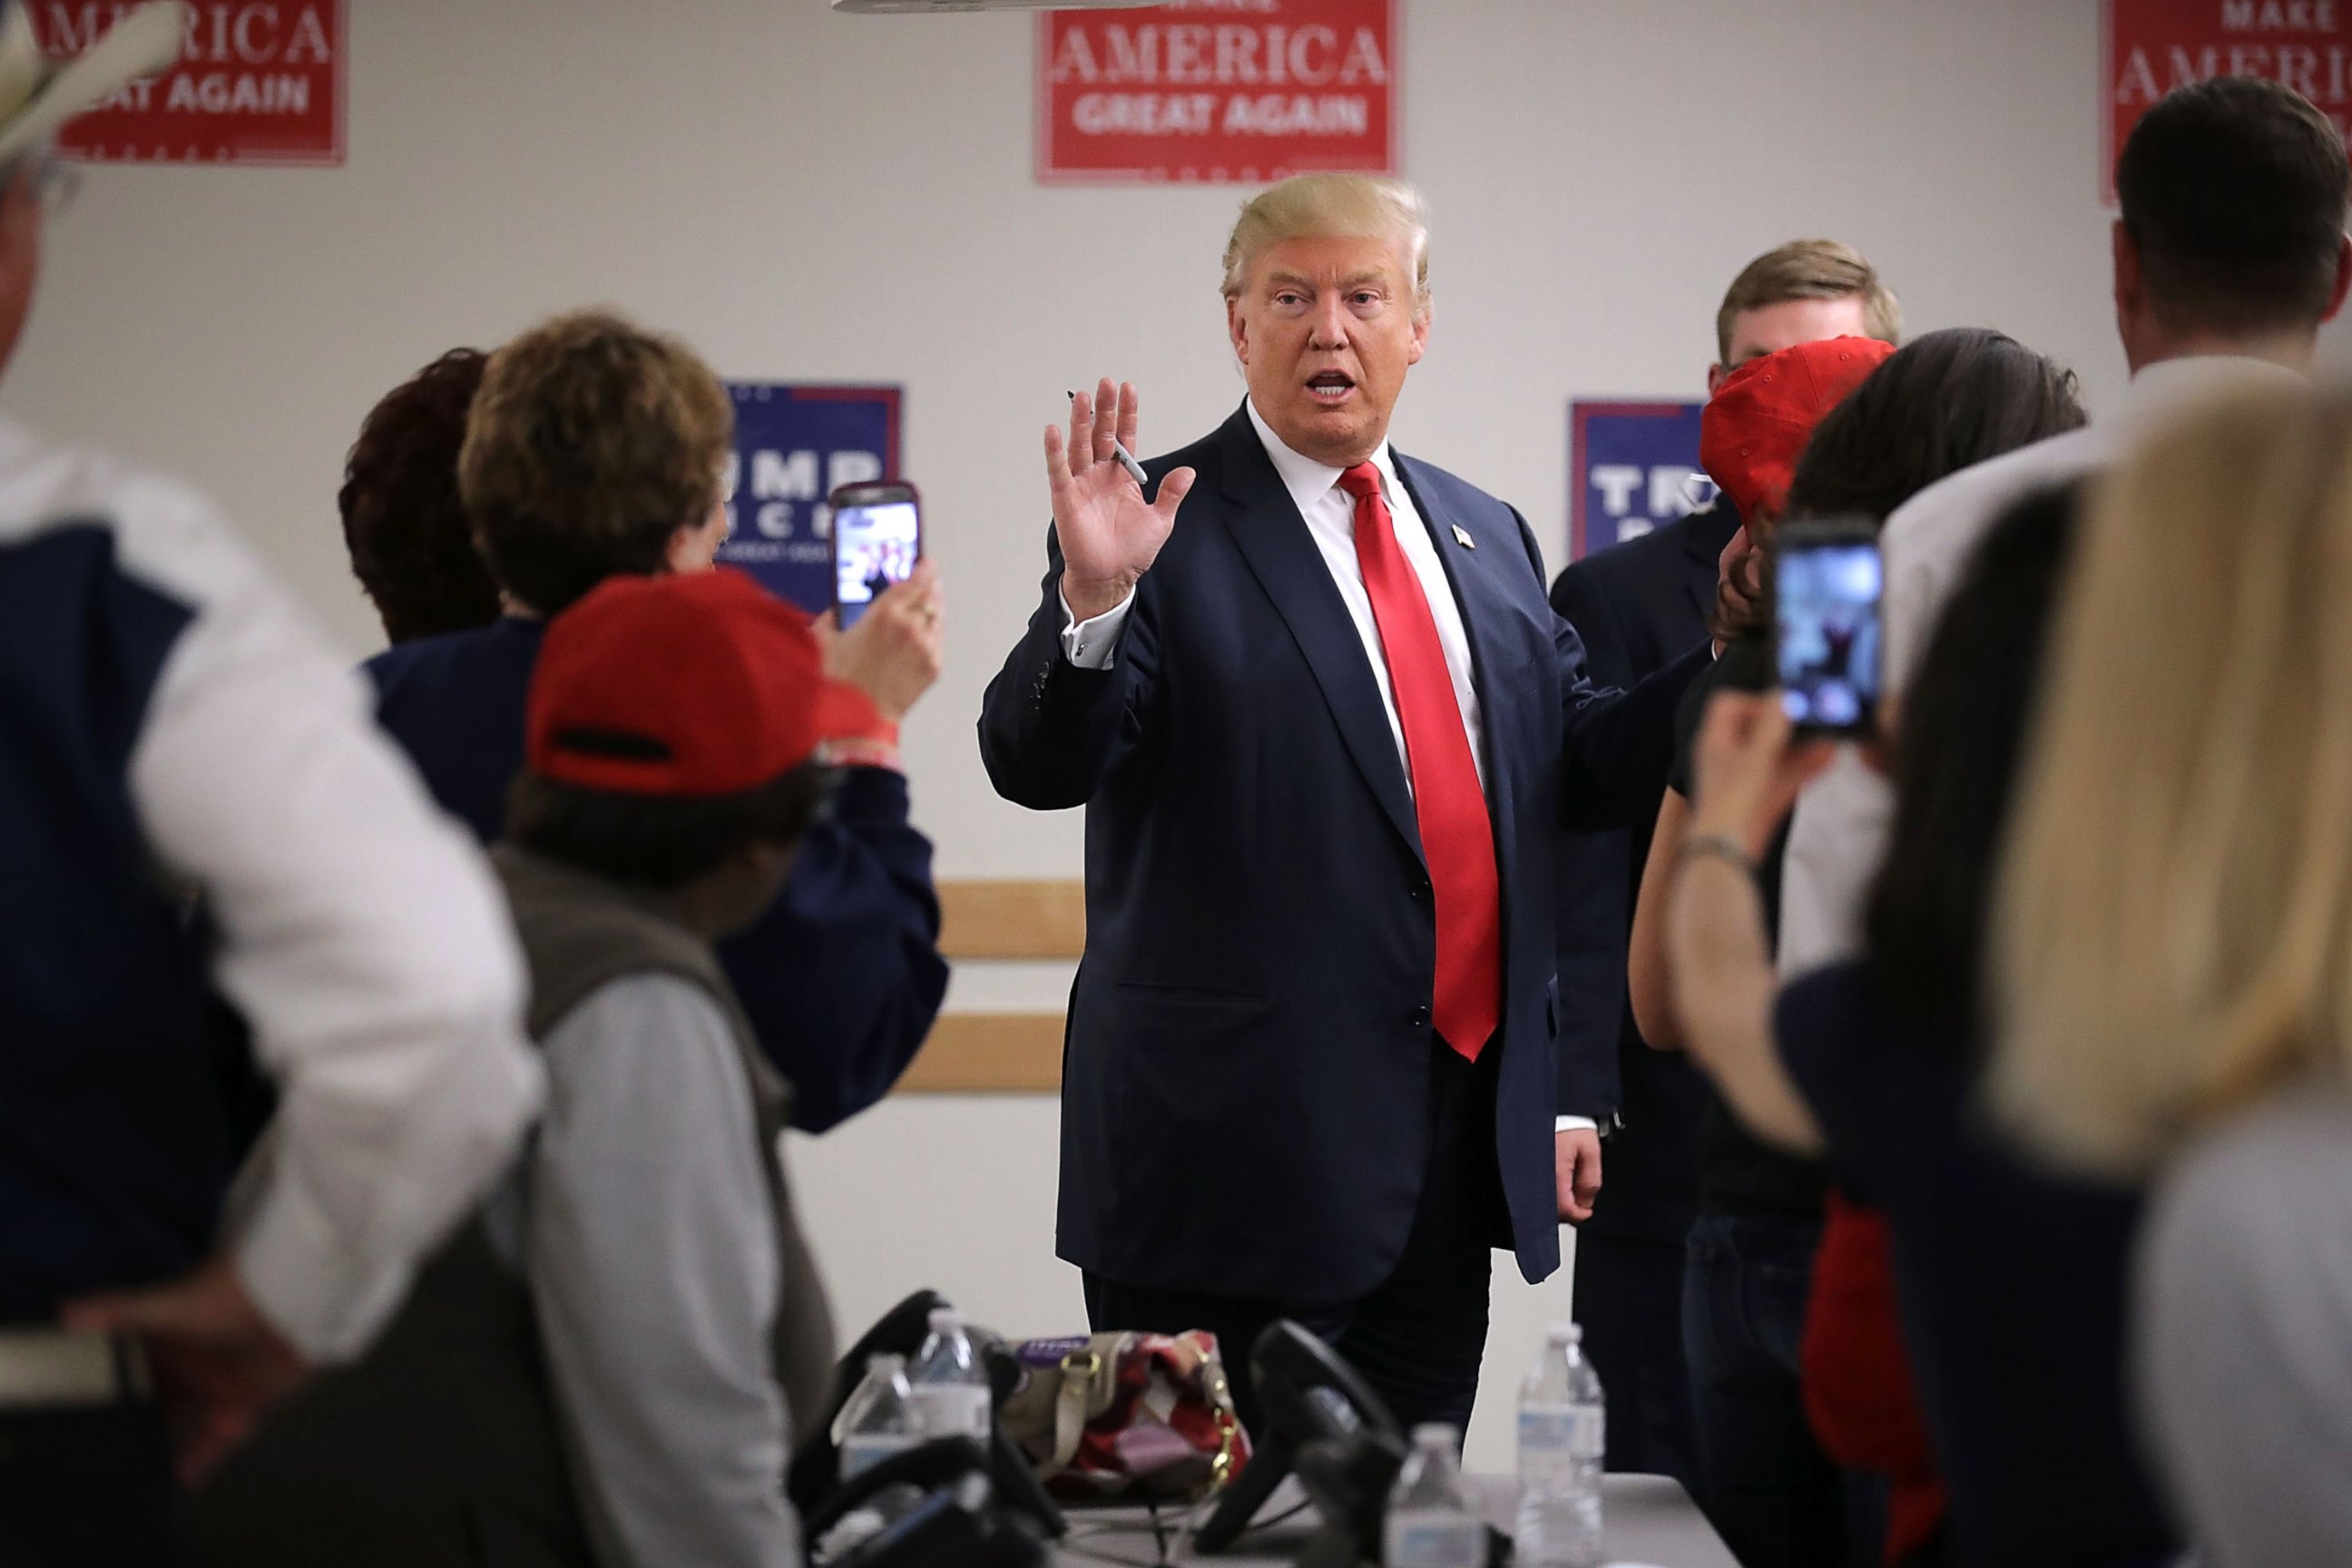 PHOTO: Republican presidential nominee Donald Trump talks with volunteers at a campaign phone bank before a rally at the Bank of Colorado Arena on the campus of University of Northern Colorado, Oct. 30, 2016 in Greeley, Colorado. 